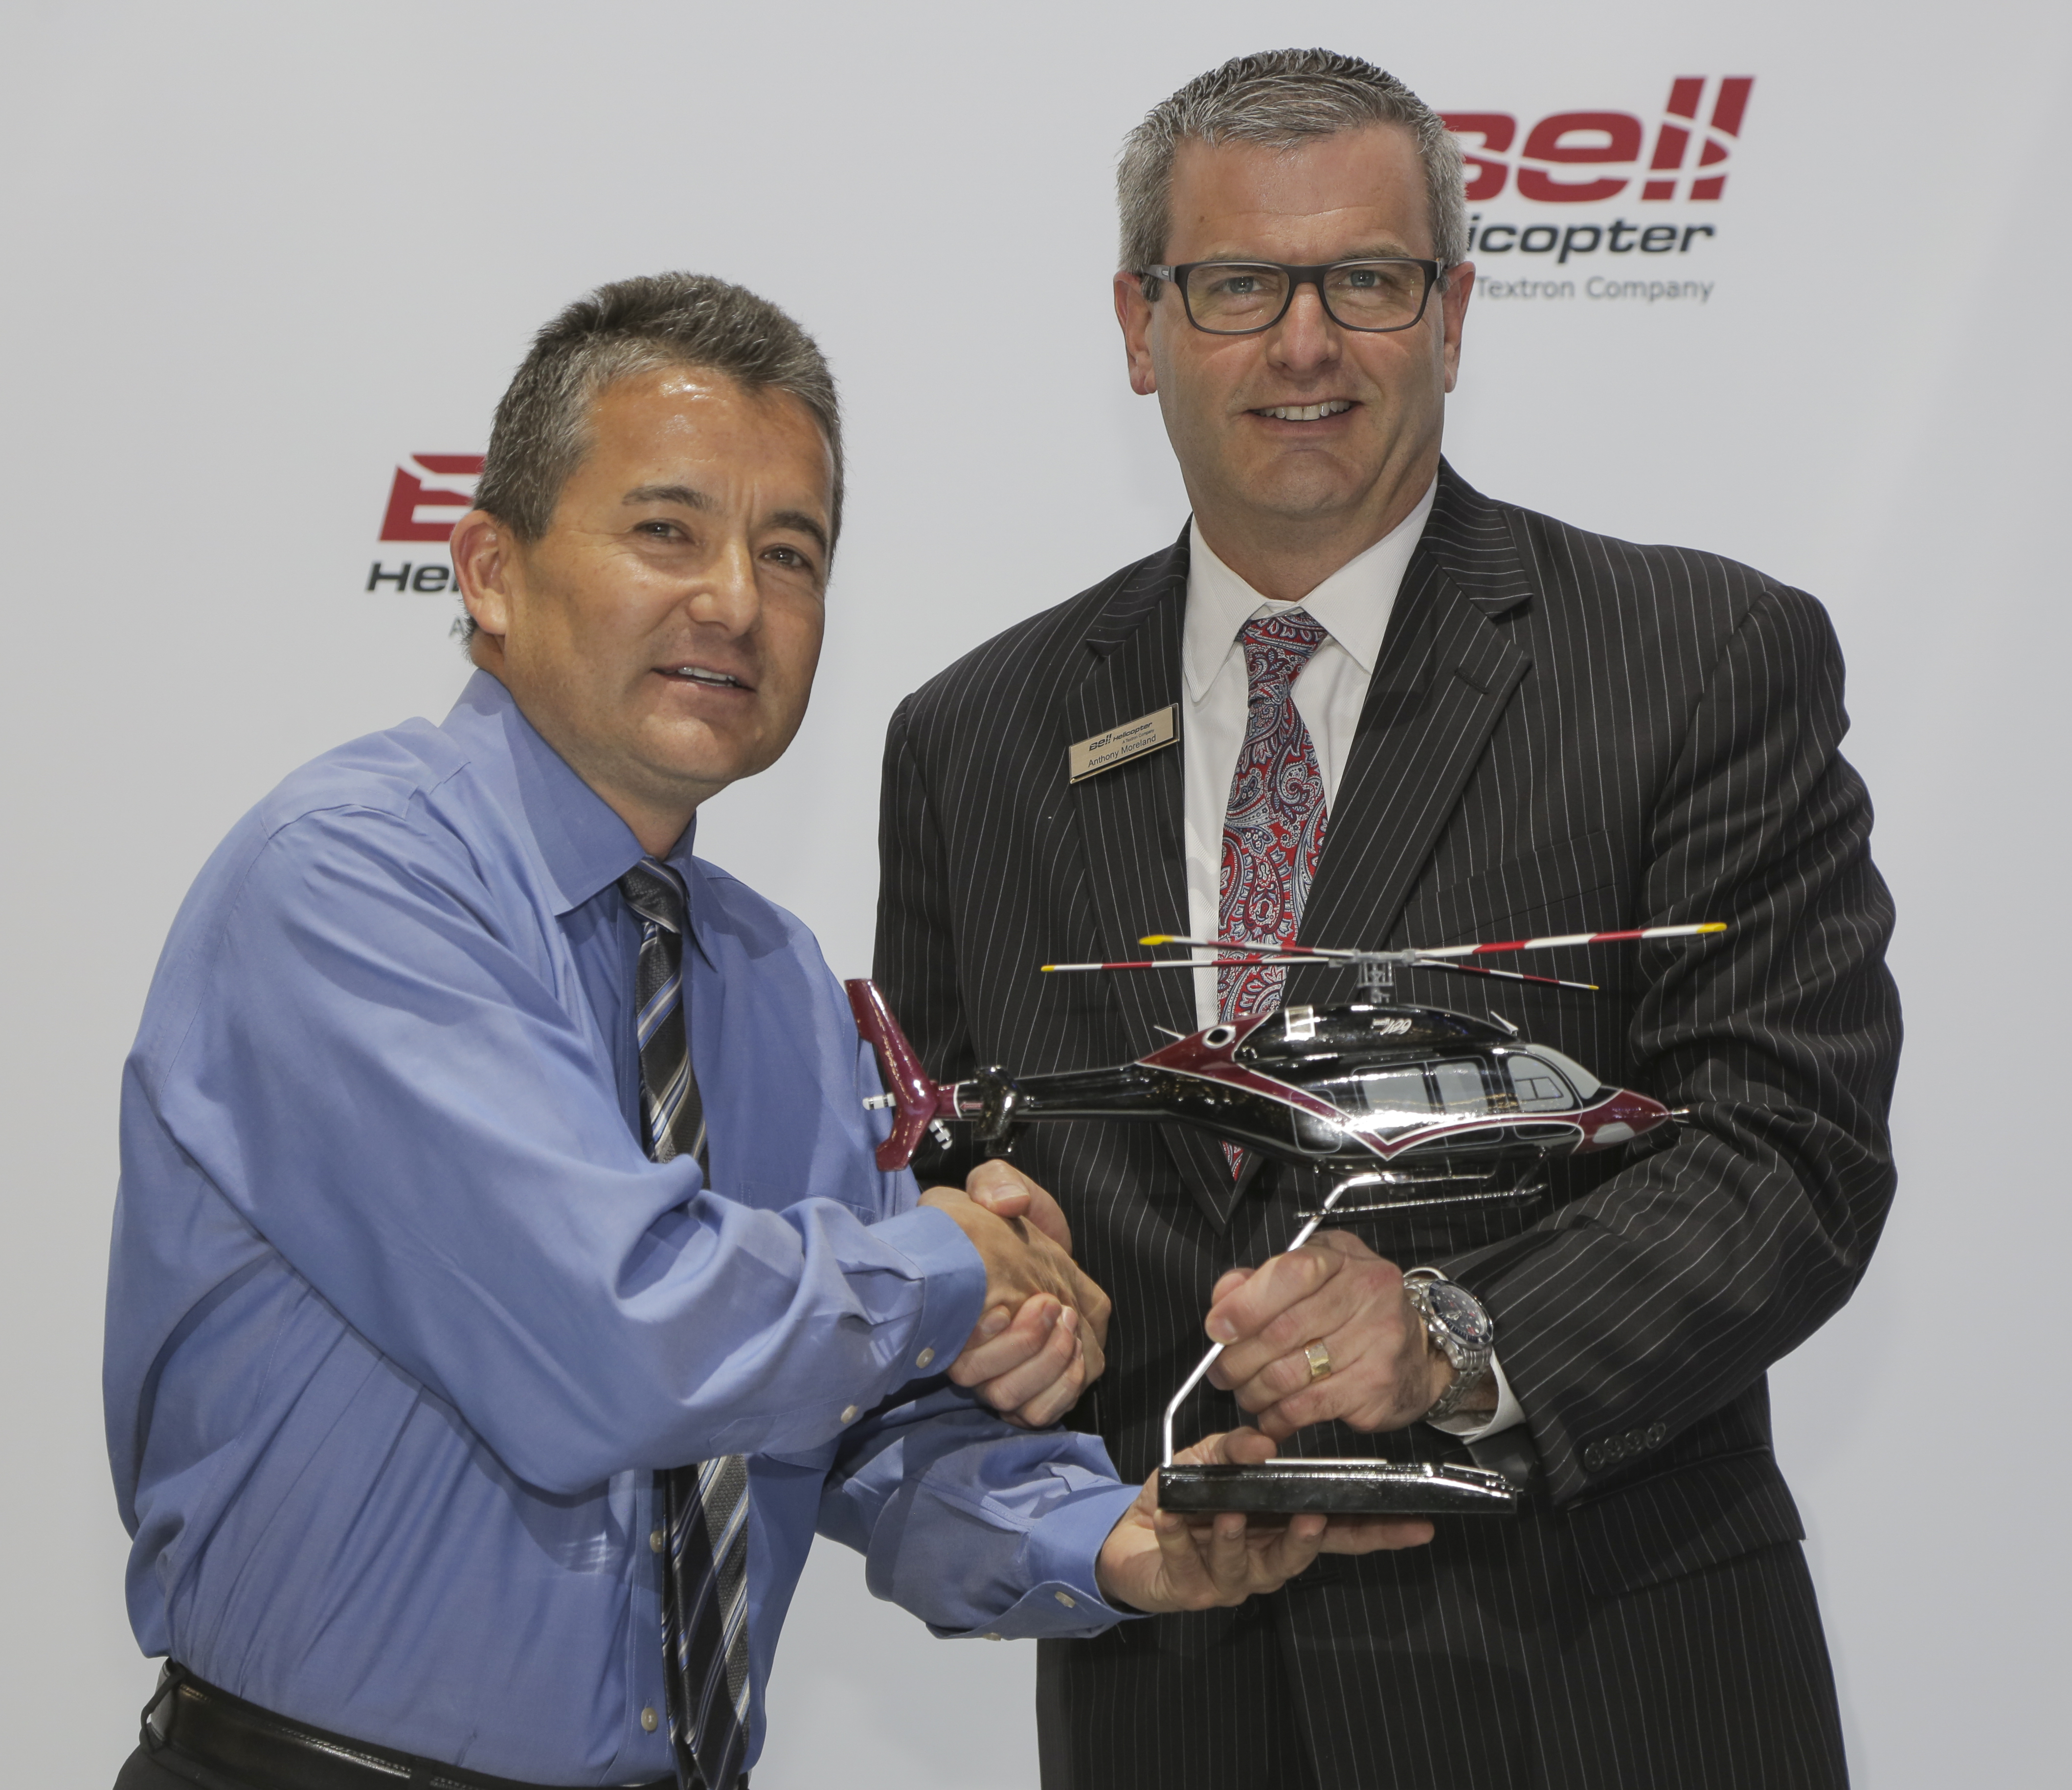 Terry Miyauchi from Arizona Department of Public Safety, left, and Bell Helicopter’s Anthony Moreland, shake hands.